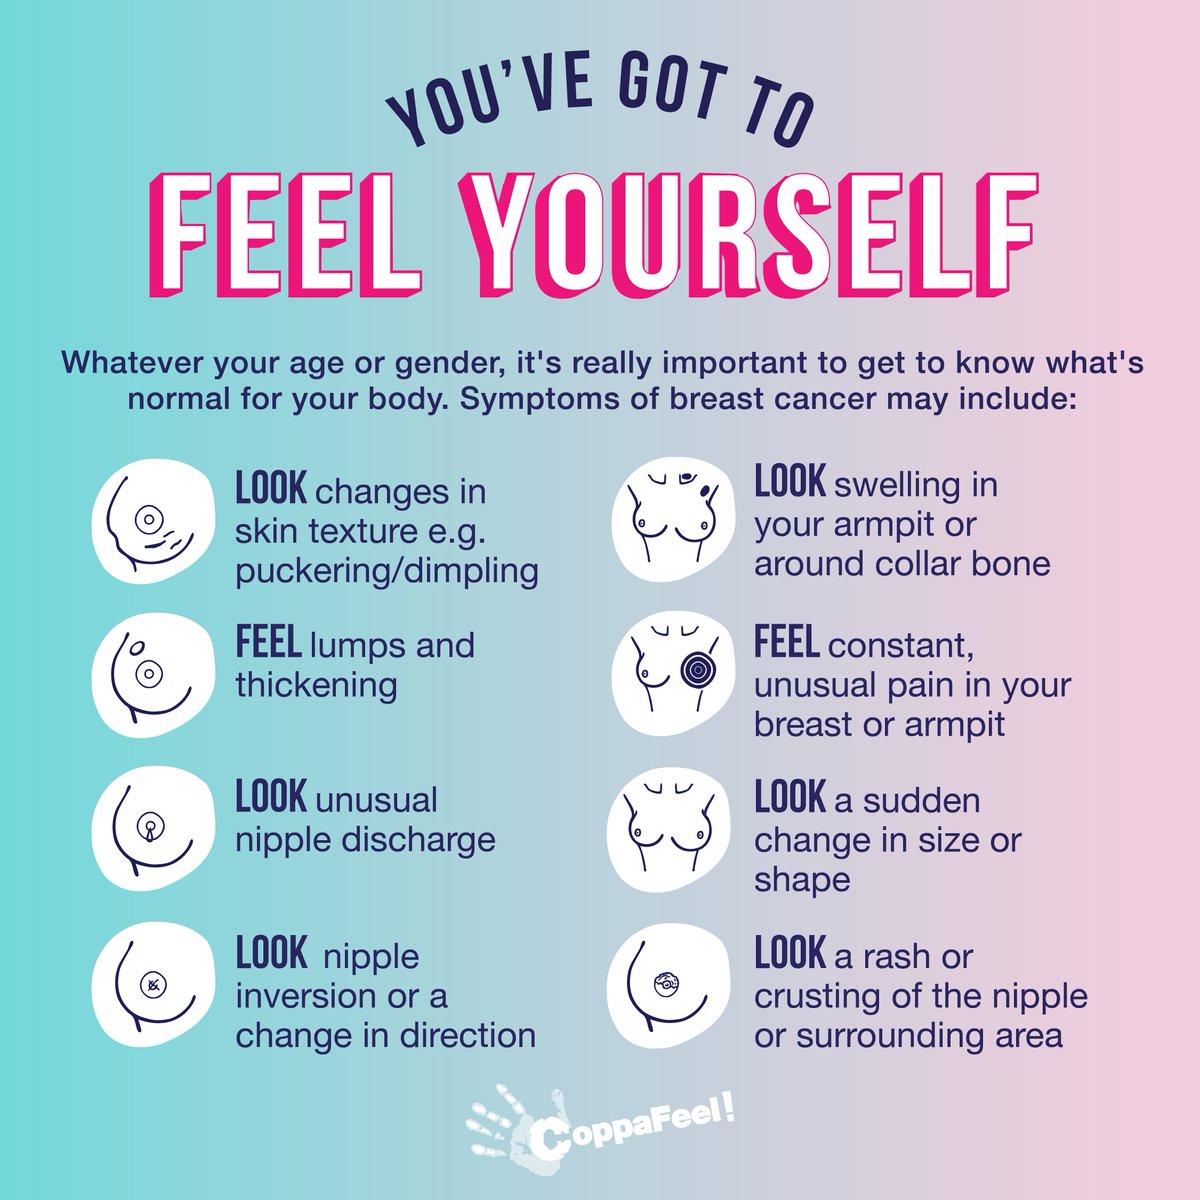 You've got to ✨ feel yourself! ✨ Be aware of the signs and symptoms of breast cancer to look out for. Some of these changes may occur naturally with your cycle and can be perfectly normal. If in doubt, get it checked out. Head to coppafeel.org for more info.